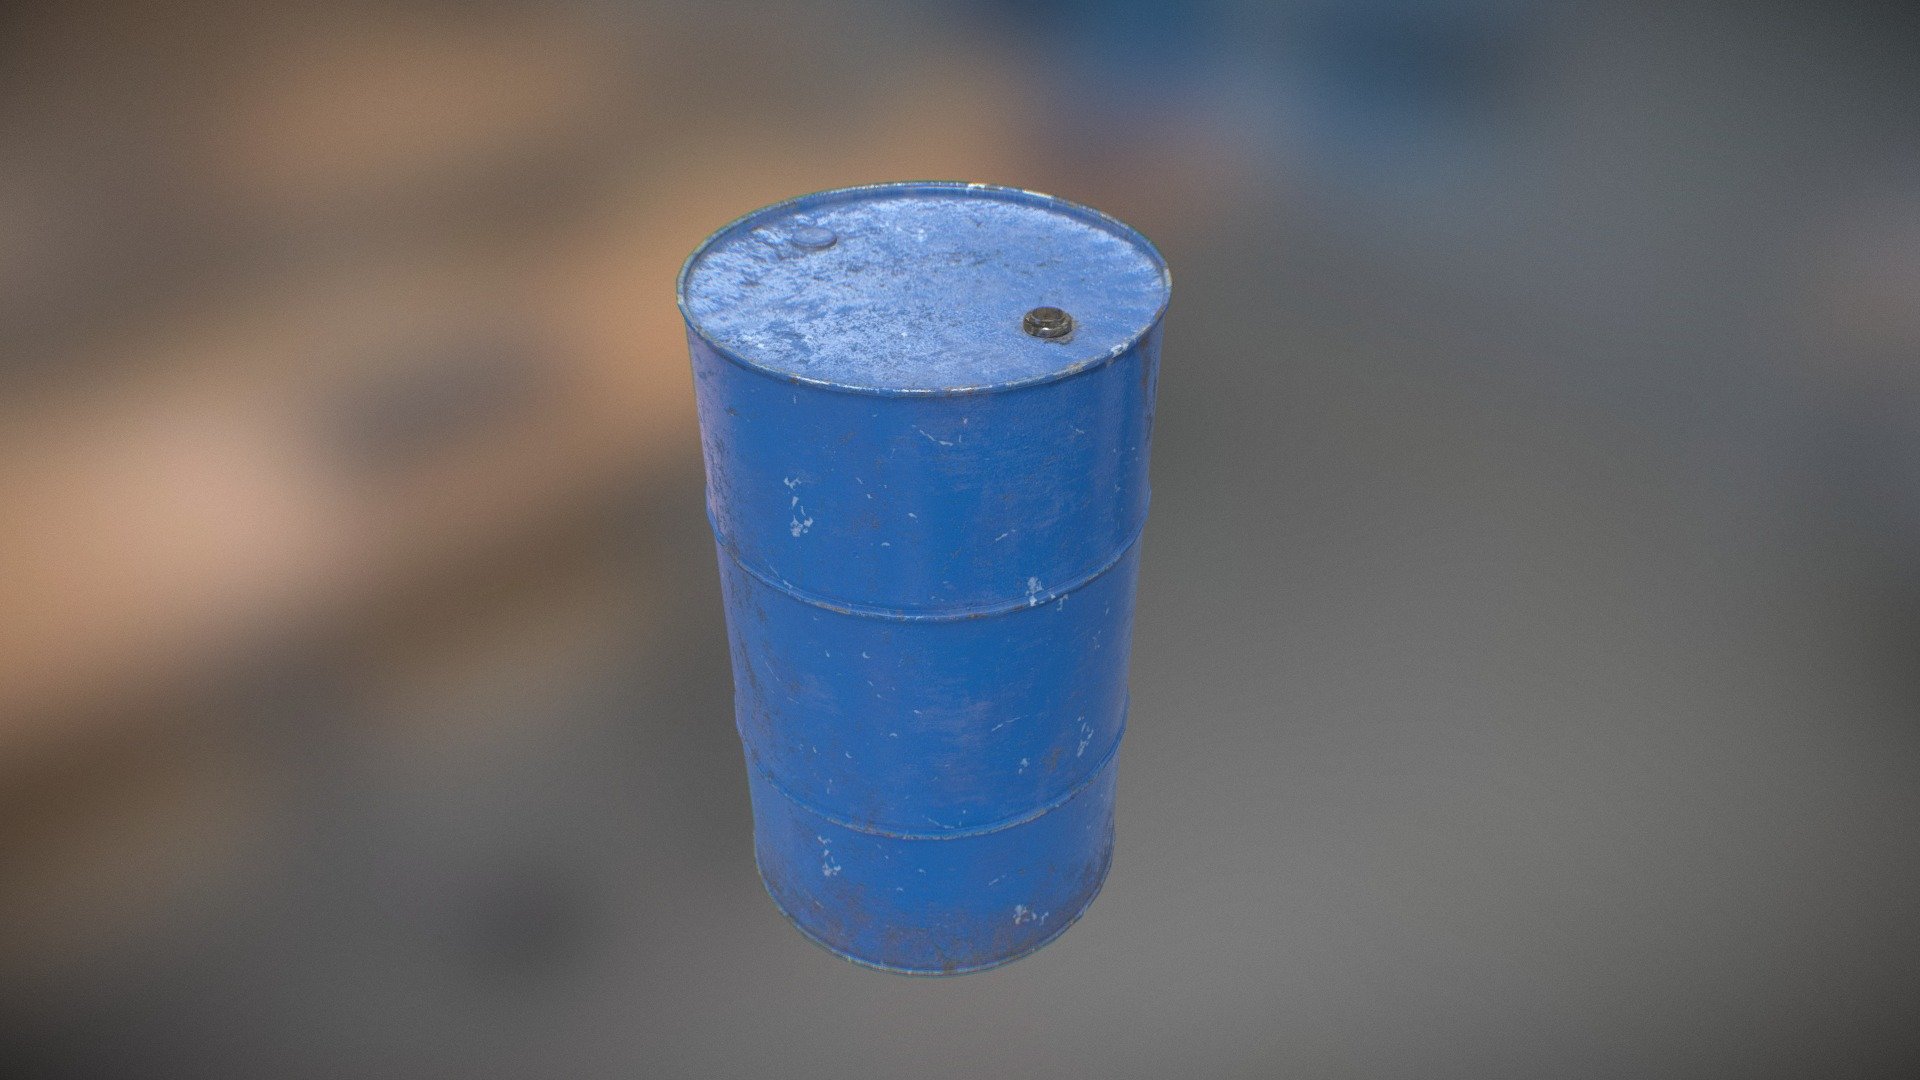 Tris : 1722
Textures count : 3
Texture Size : 2048x2048
PBR : Yes
3D model Game Ready for Unreal engine 4 - Oil Drum - 3D model by lionicolas 3d model